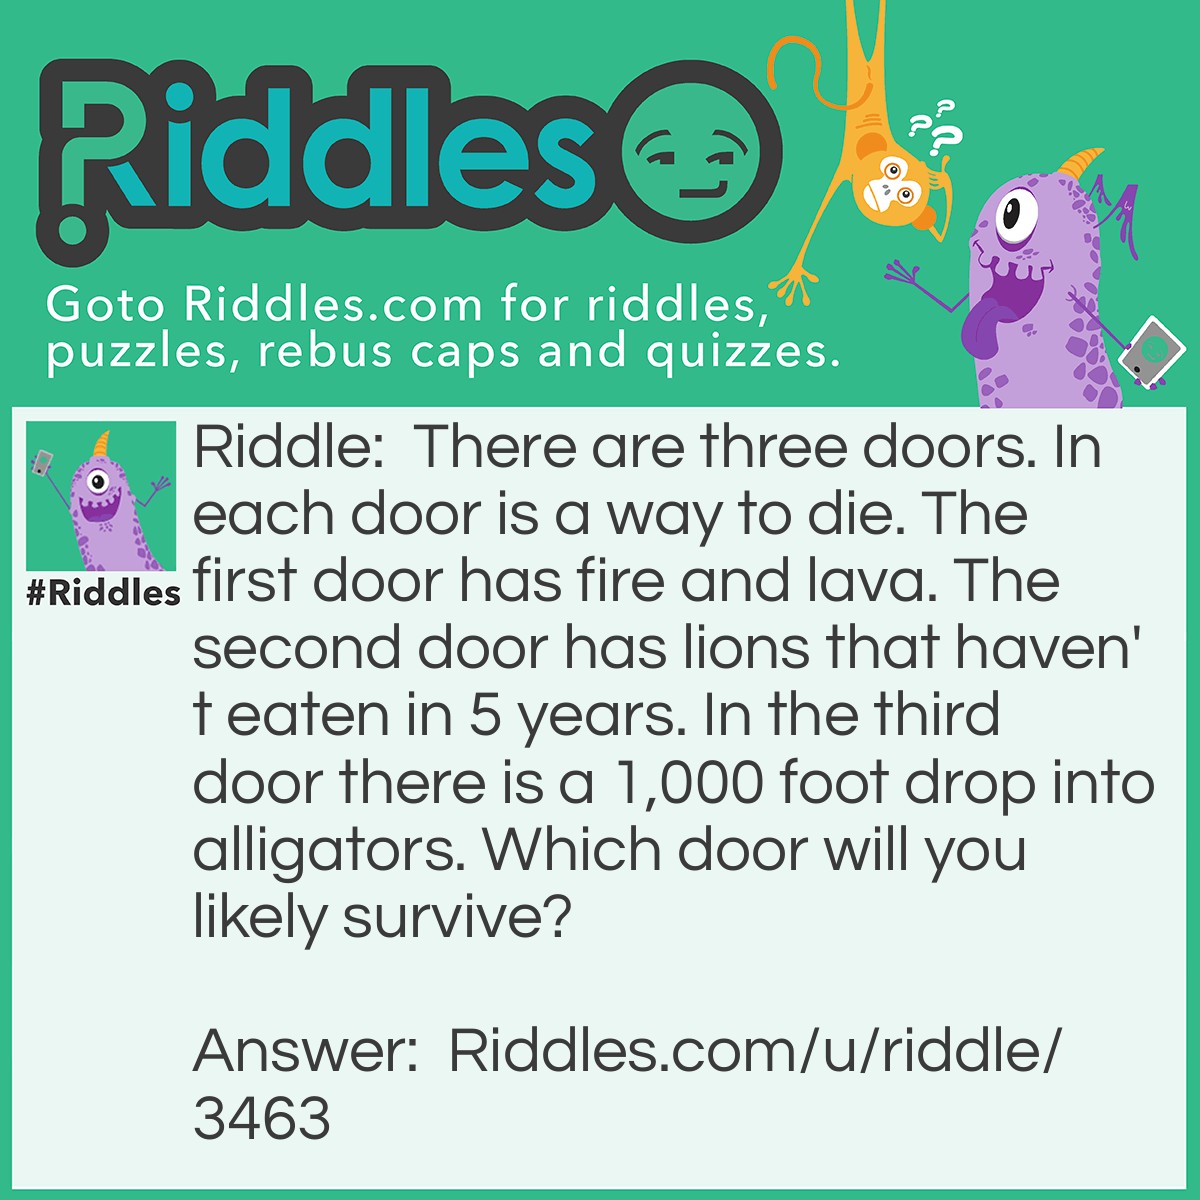 Riddle: There are three doors. In each door is a way to die. The first door has fire and lava. The second door has lions that haven't eaten in 5 years. In the third door, there is a 1,000-foot drop into alligators. Which door will you likely survive? Answer: The second door with the lions. Since they haven't eaten in 5 years they will have died.